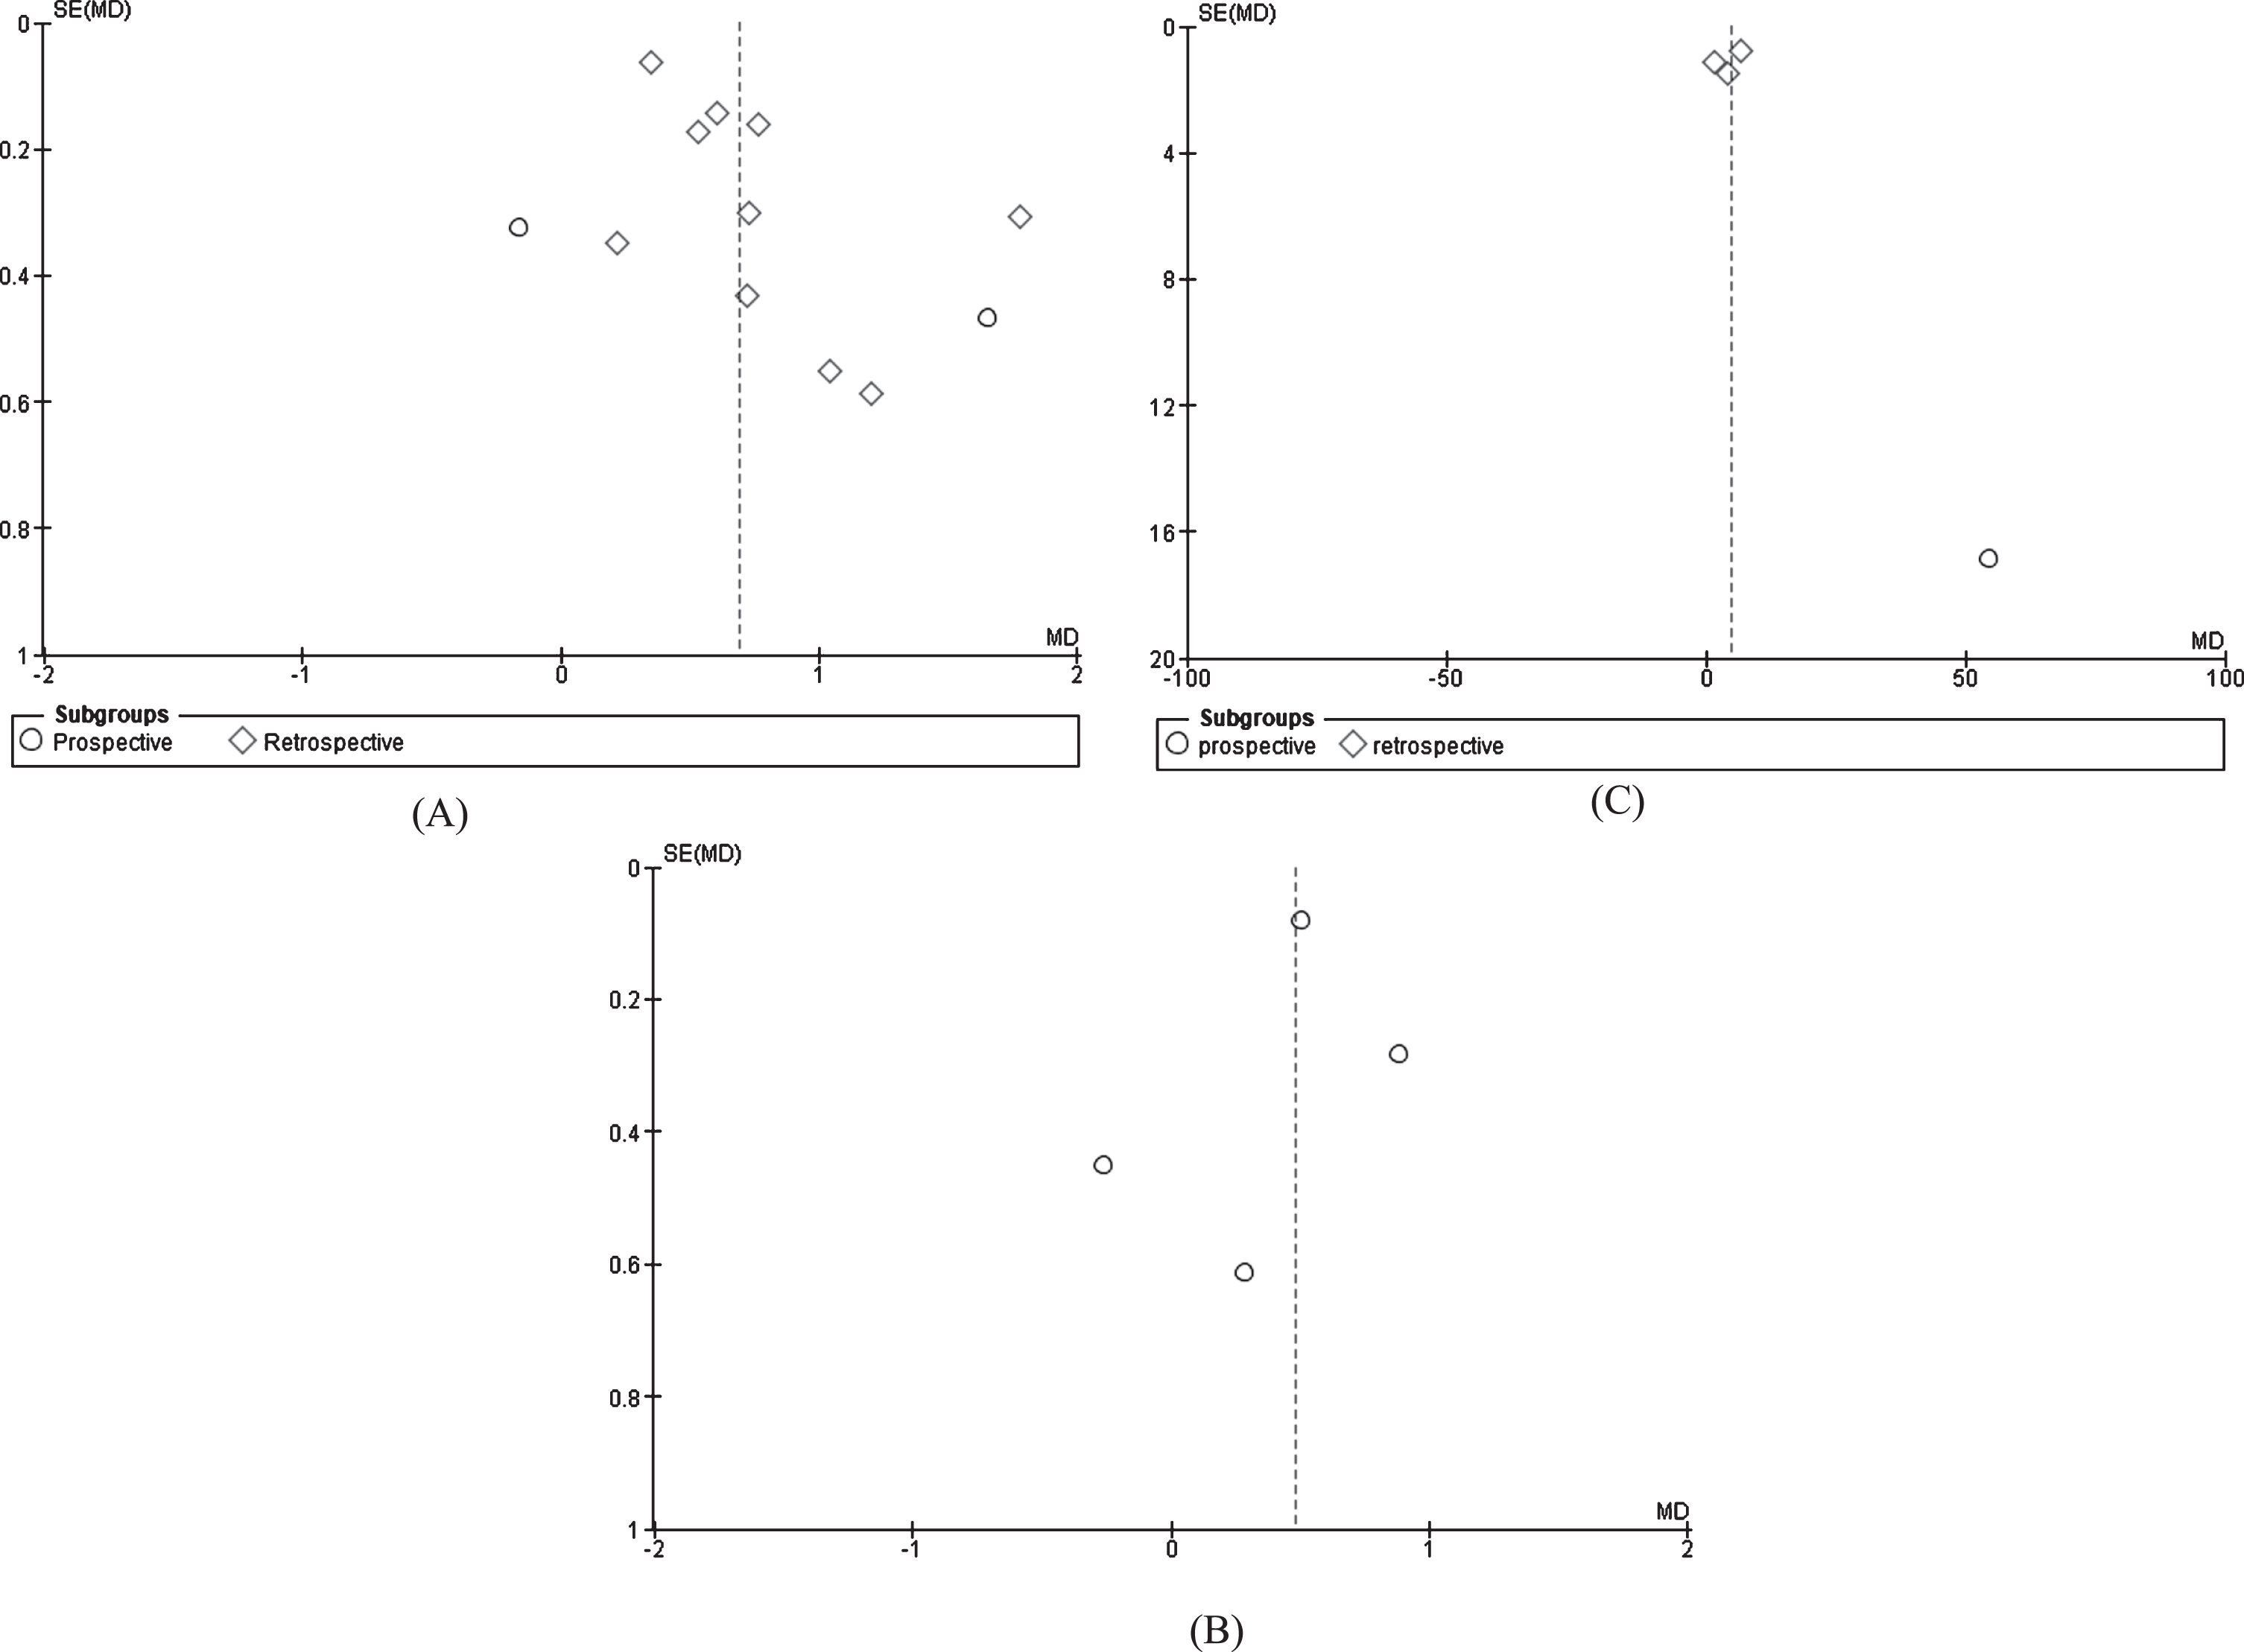 Funnel plot shows no publication bias for (A) fibrinogen and severity [p = 0.154], but there are publication biases for (B) fibrinogen and mortality, and (C) fibrin degradation product and composite poor outcomes in patients with COVID-19.